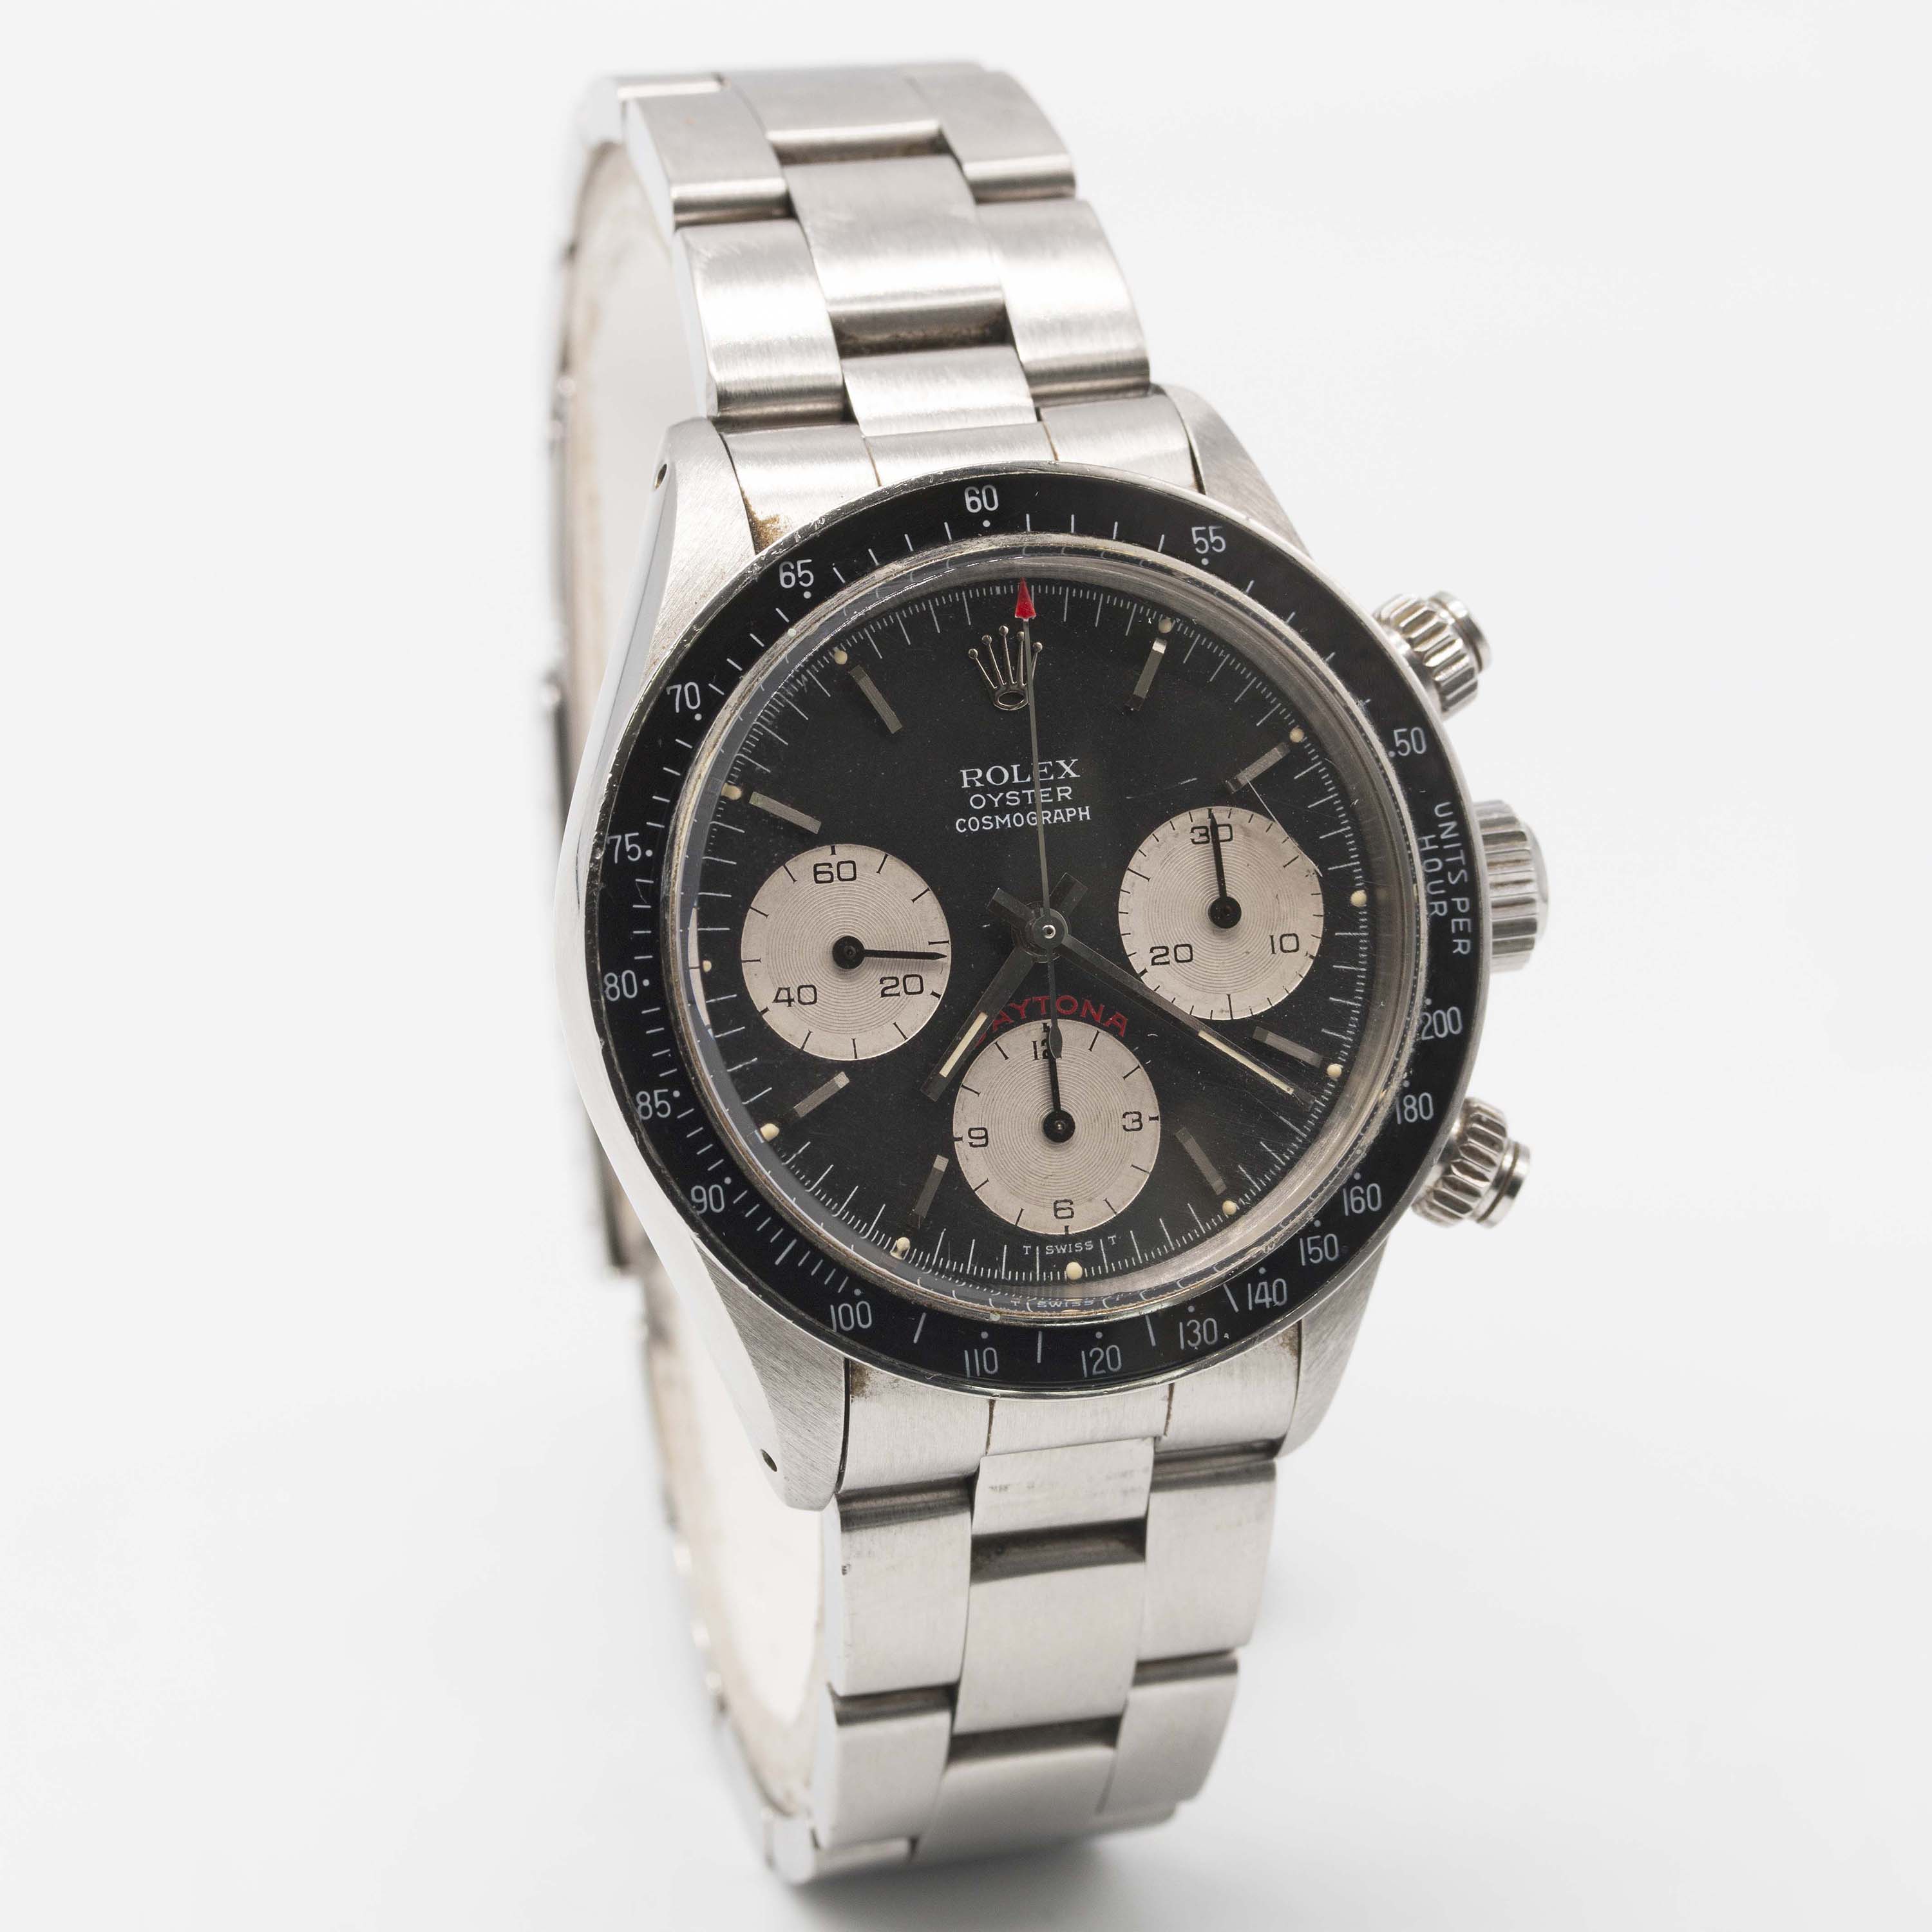 A VERY RARE GENTLEMAN'S STAINLESS STEEL ROLEX OYSTER COSMOGRAPH DAYTONA BRACELET WATCH CIRCA 1979, - Image 6 of 12